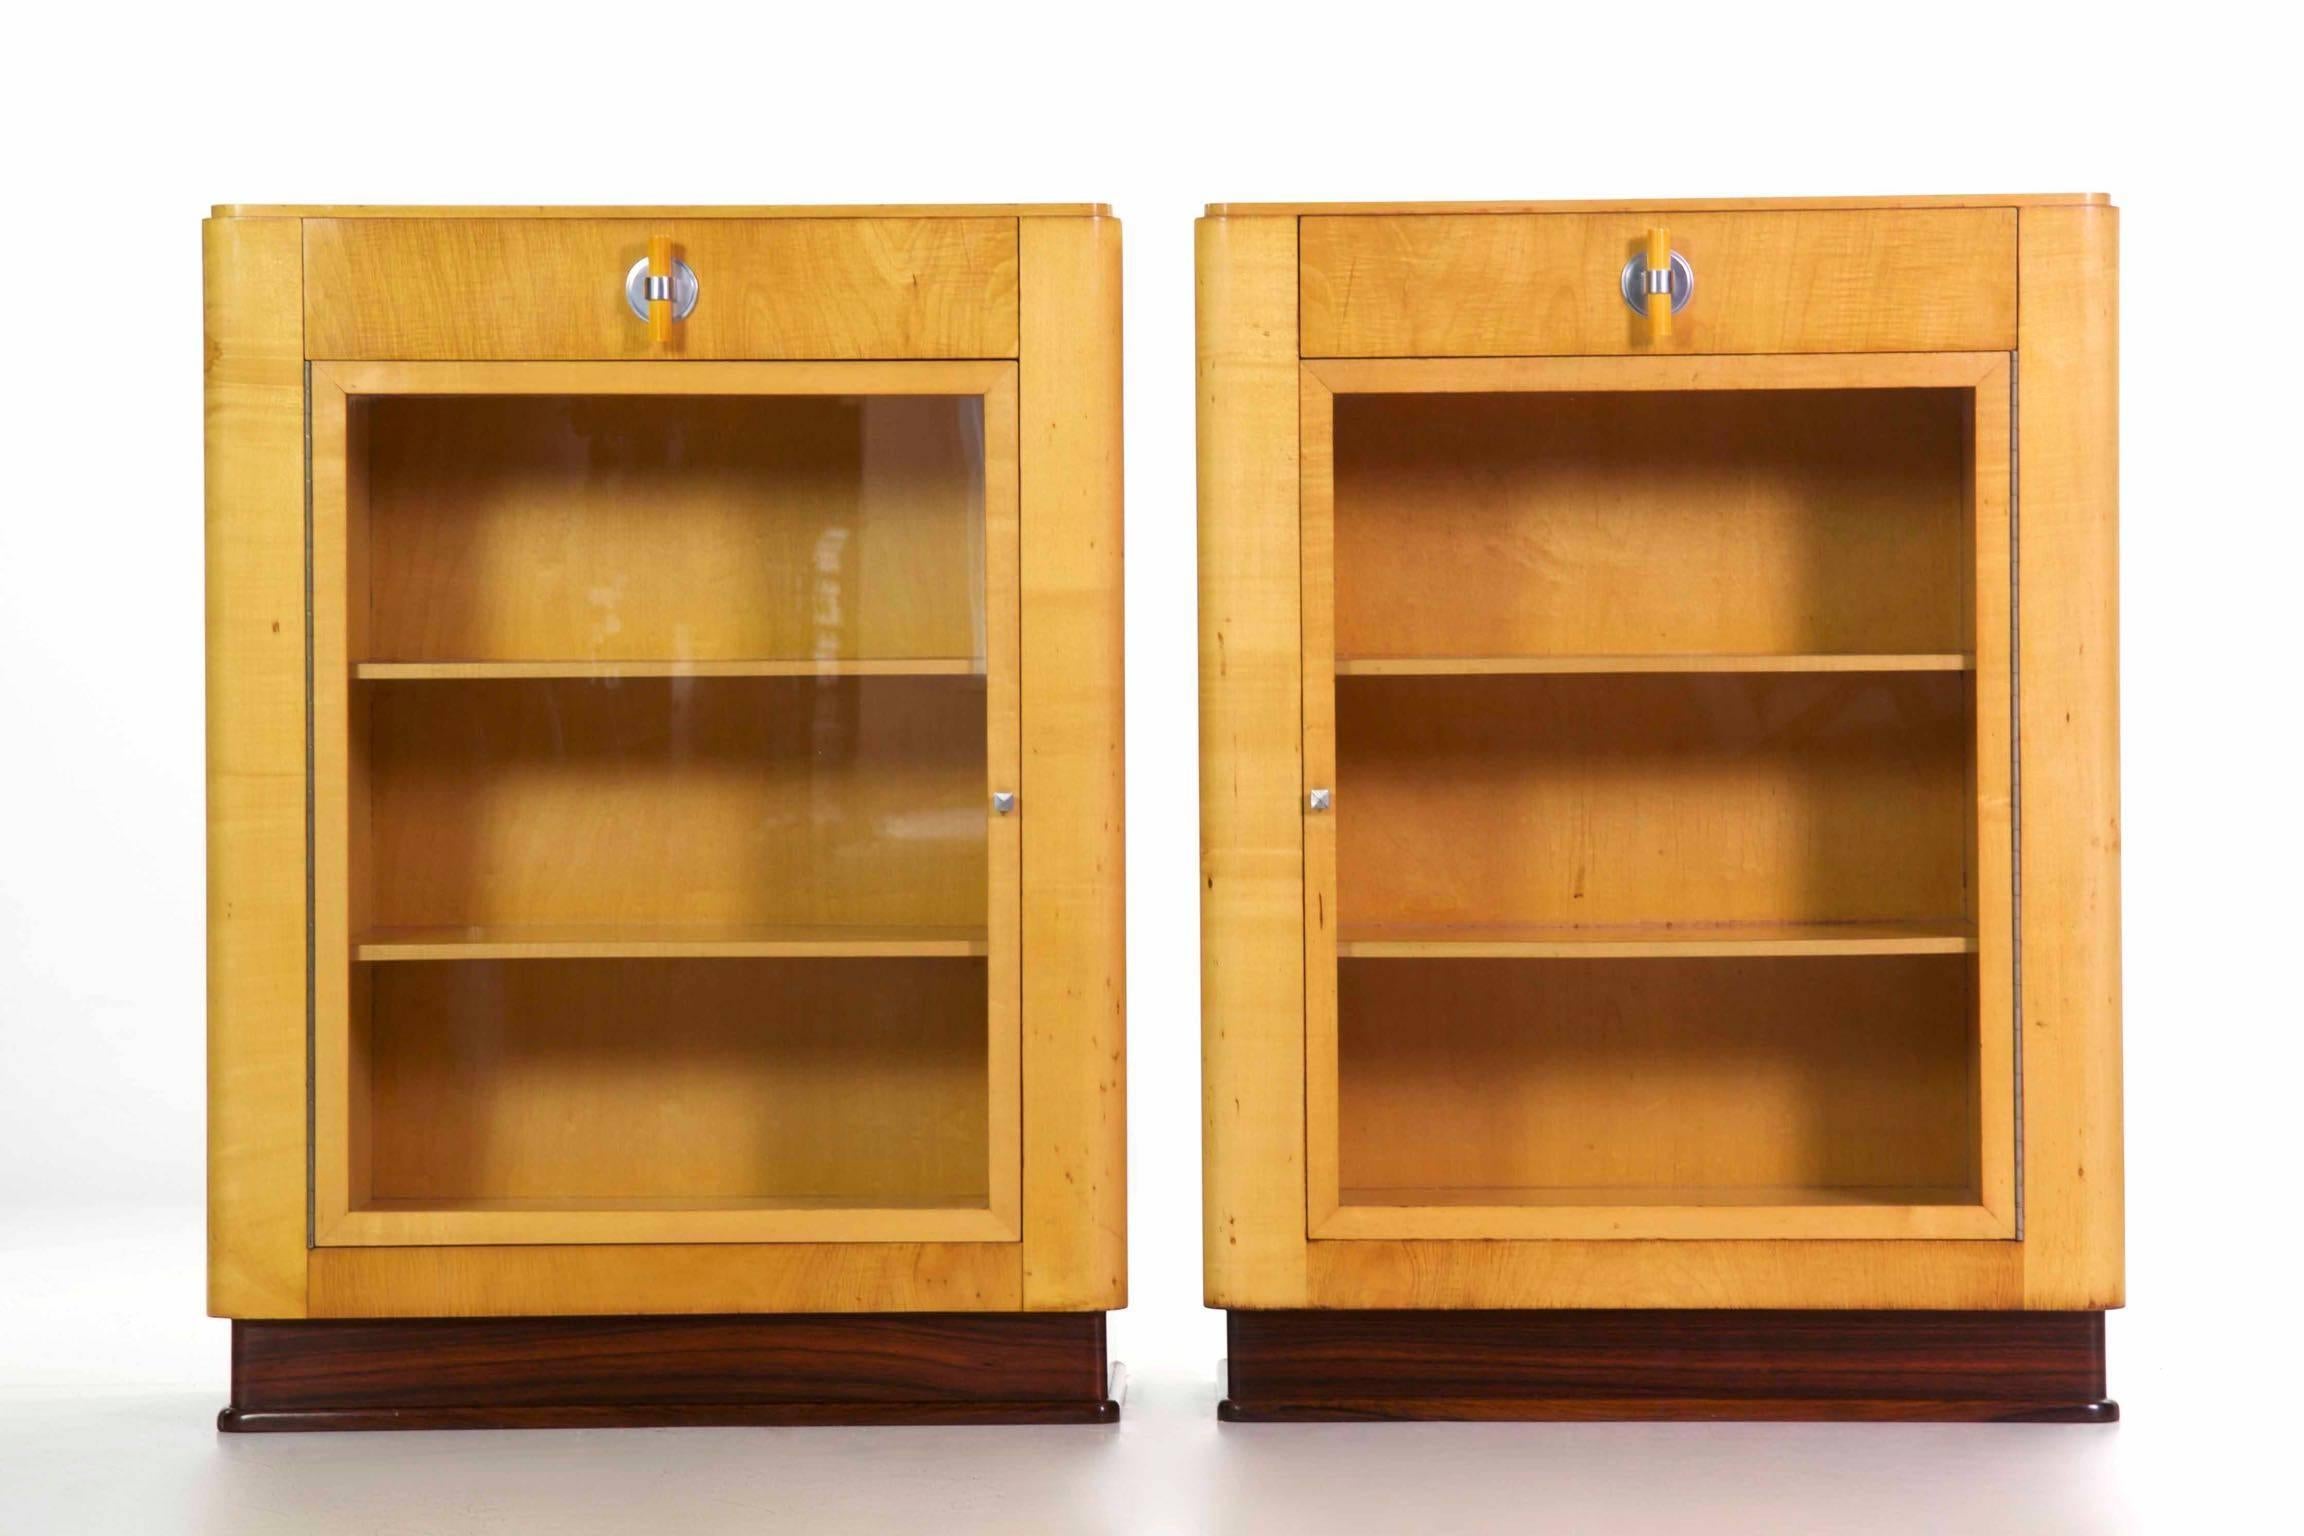 This pair of bookcases with their single drawer are designed with the very essence of the Art Deco movement expressed fully in their form. Angular and free of any excessive surface embellishment, they explore the newest and most innovative materials